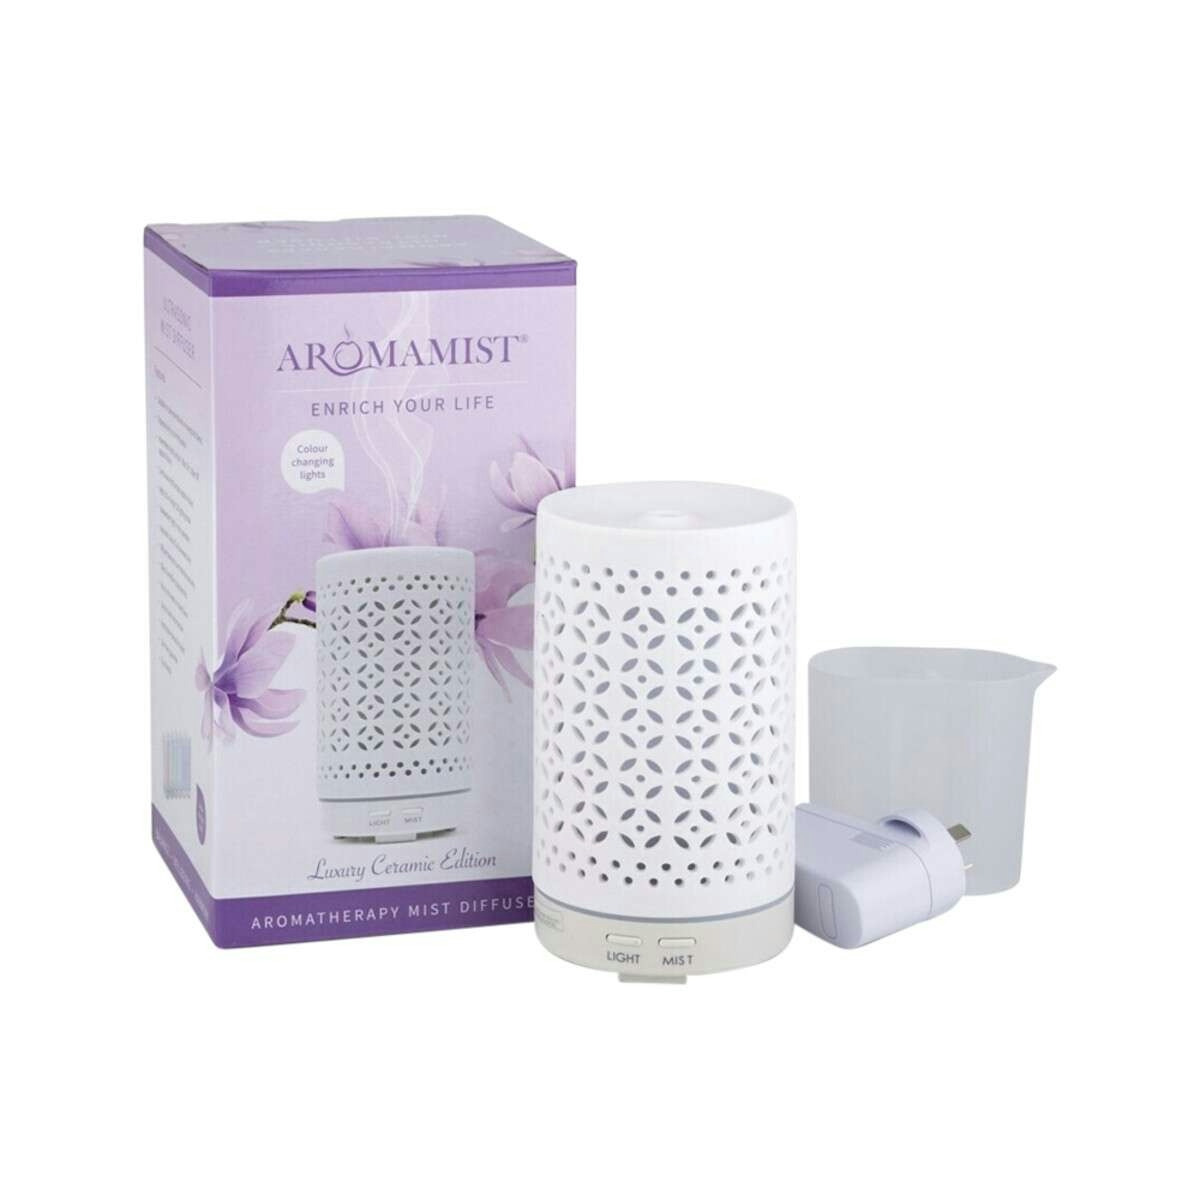 image of Aromamist Ultrasonic Mist Diffuser Mistique on white background